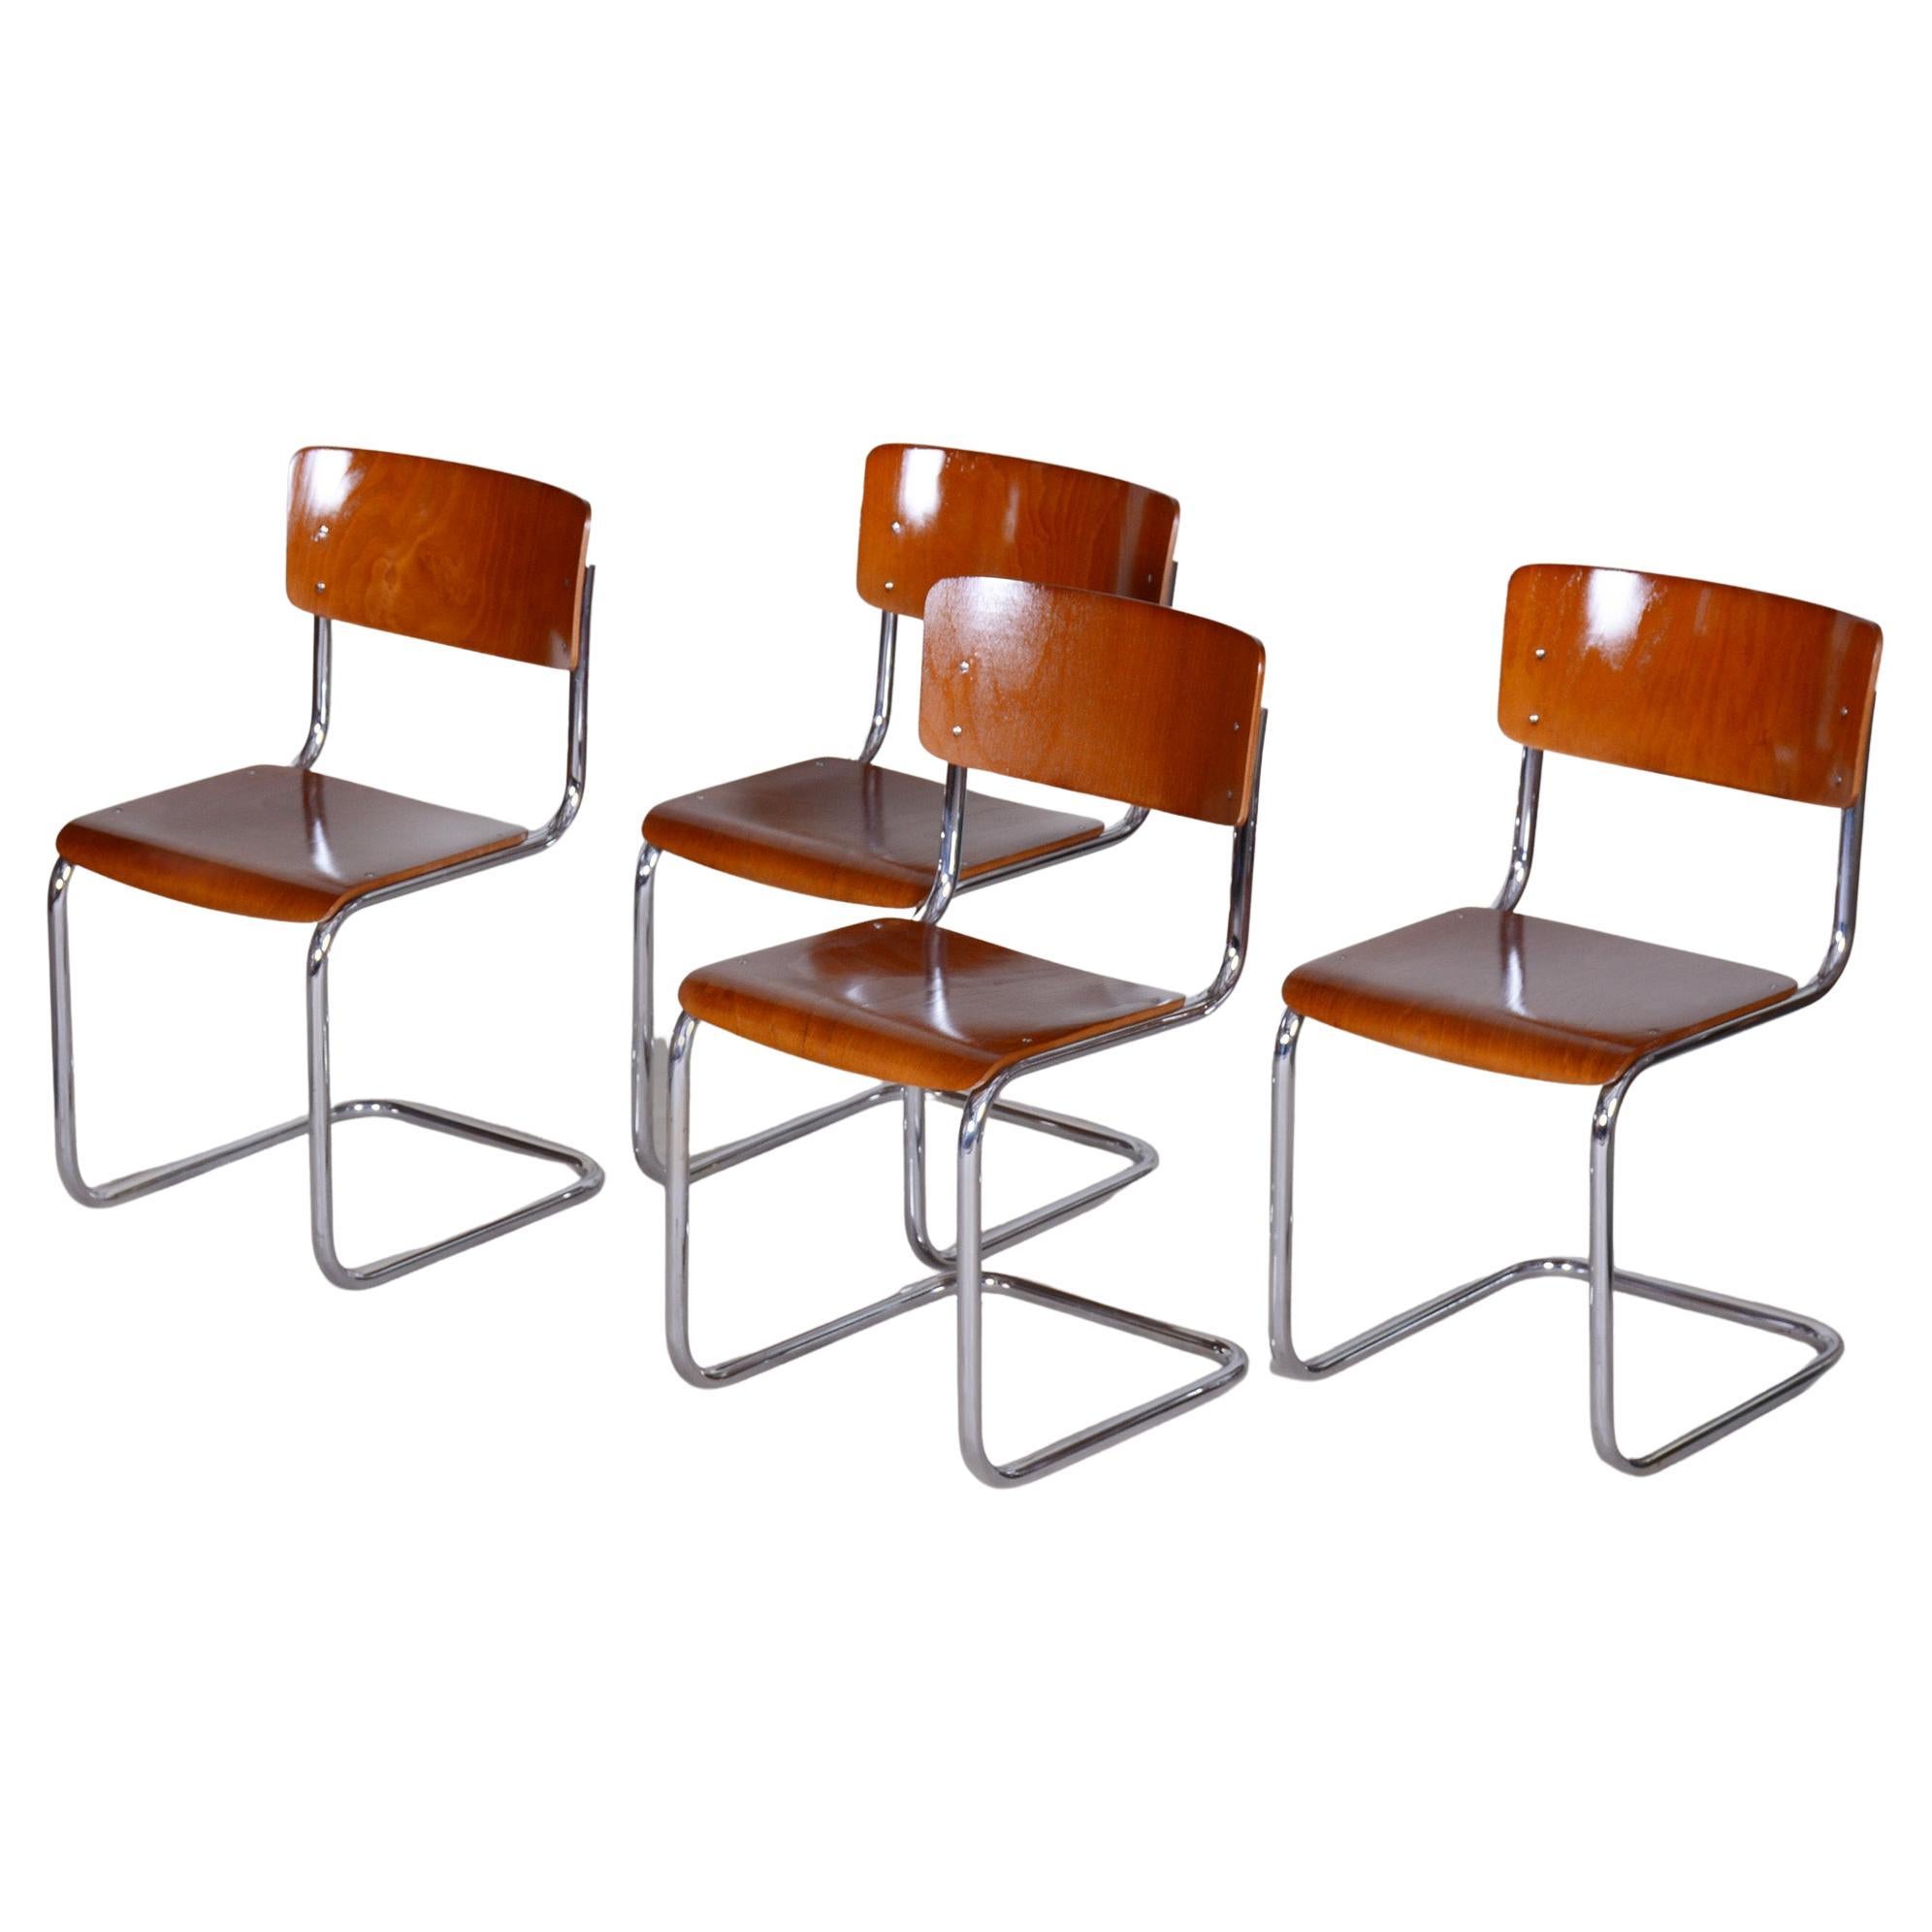 Set of Four Bauhaus Beech Chairs, Restored, Germany, 1930s